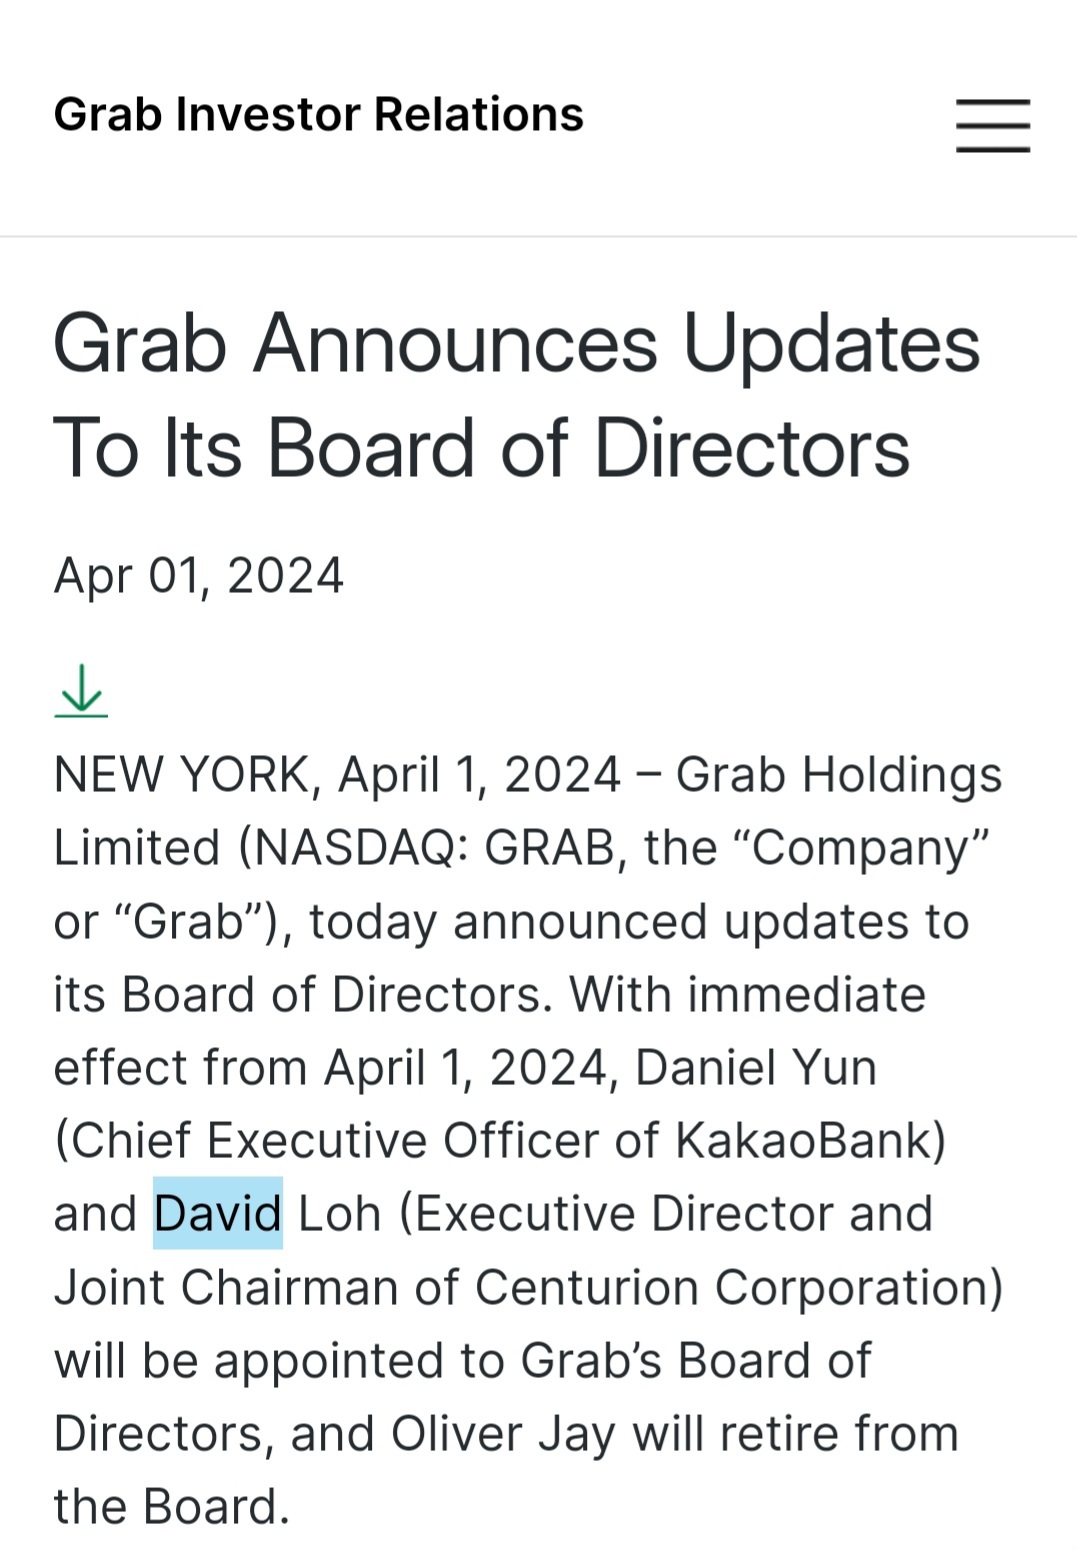 $Ohmyhome (OMH.US)$$Grab Holdings (GRAB.US)$ chairman of ohmyhome joining grab's board? something big happening?[Buy][Buy][Buy][Buy]